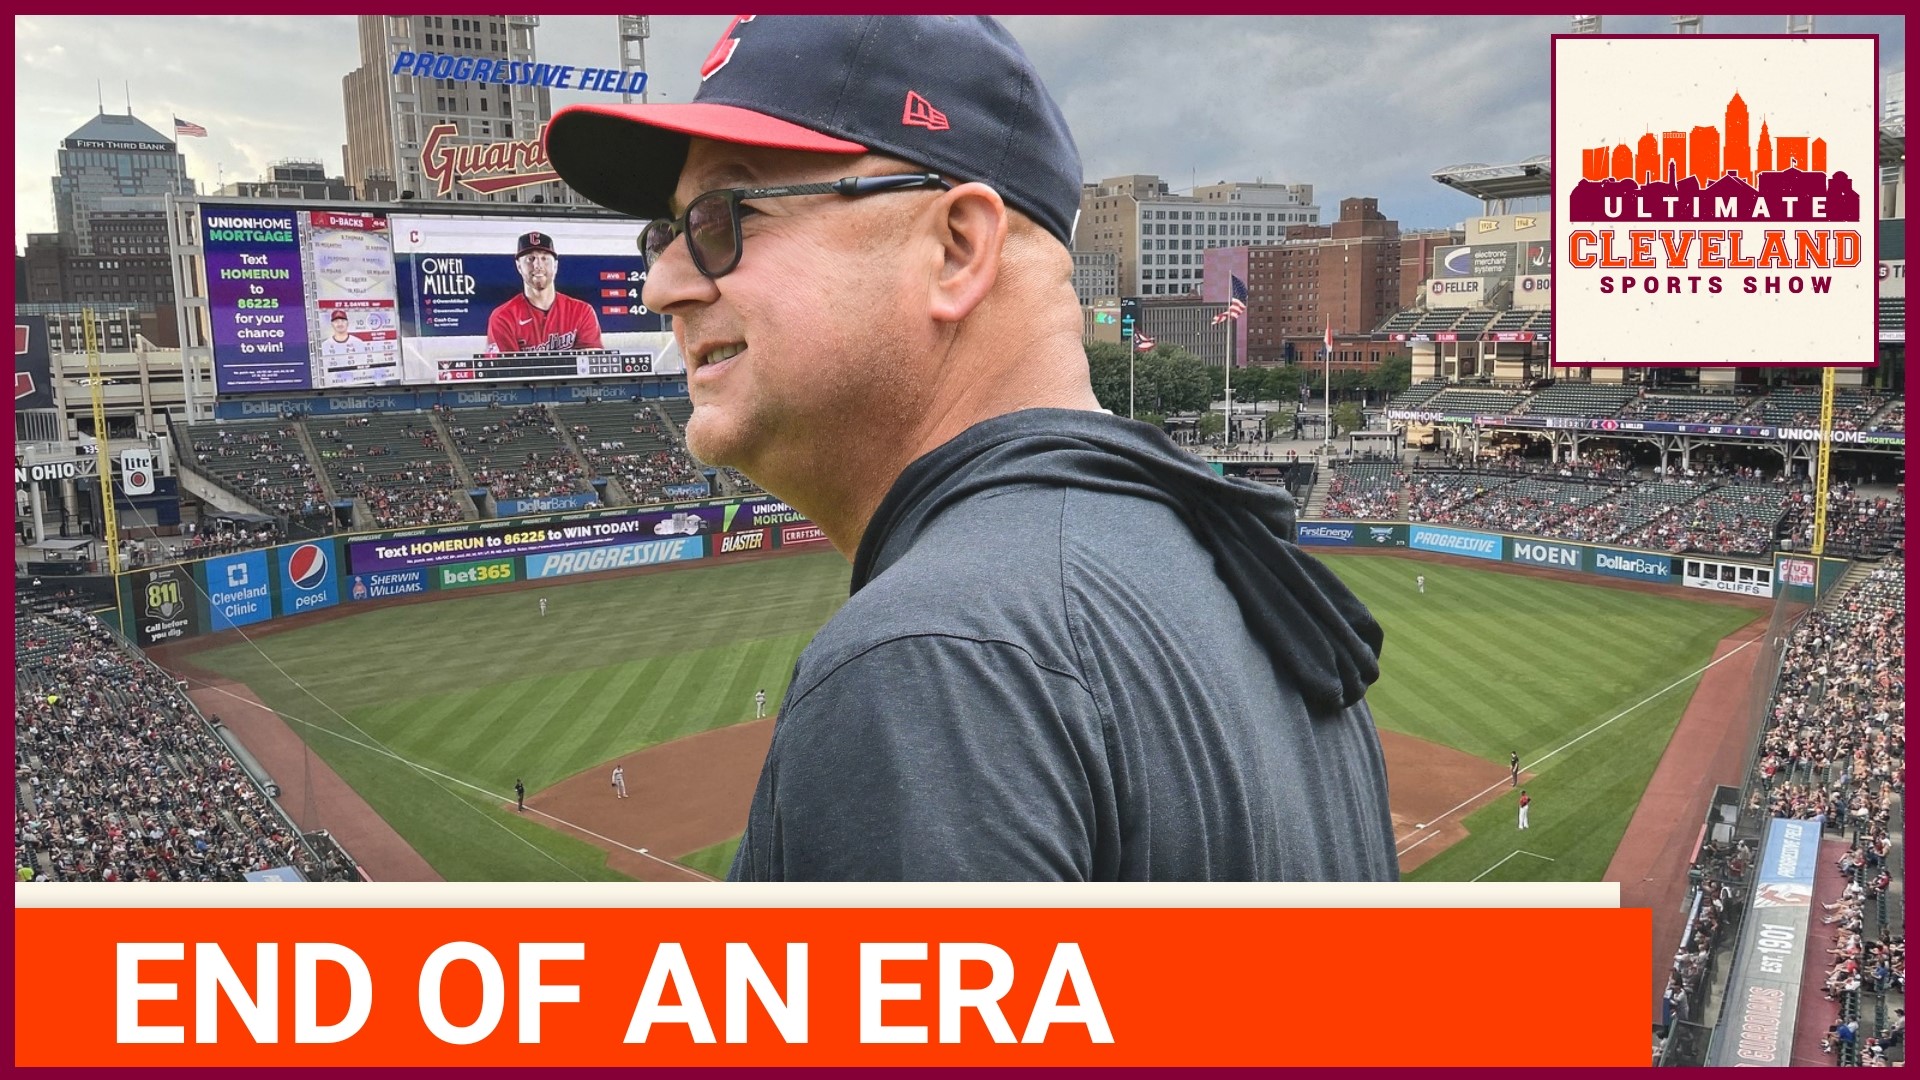 Cleveland Guardians manager Terry Francona appears to be officially retiring at the end of the season. The Cleveland Guardians are on track for their worst record